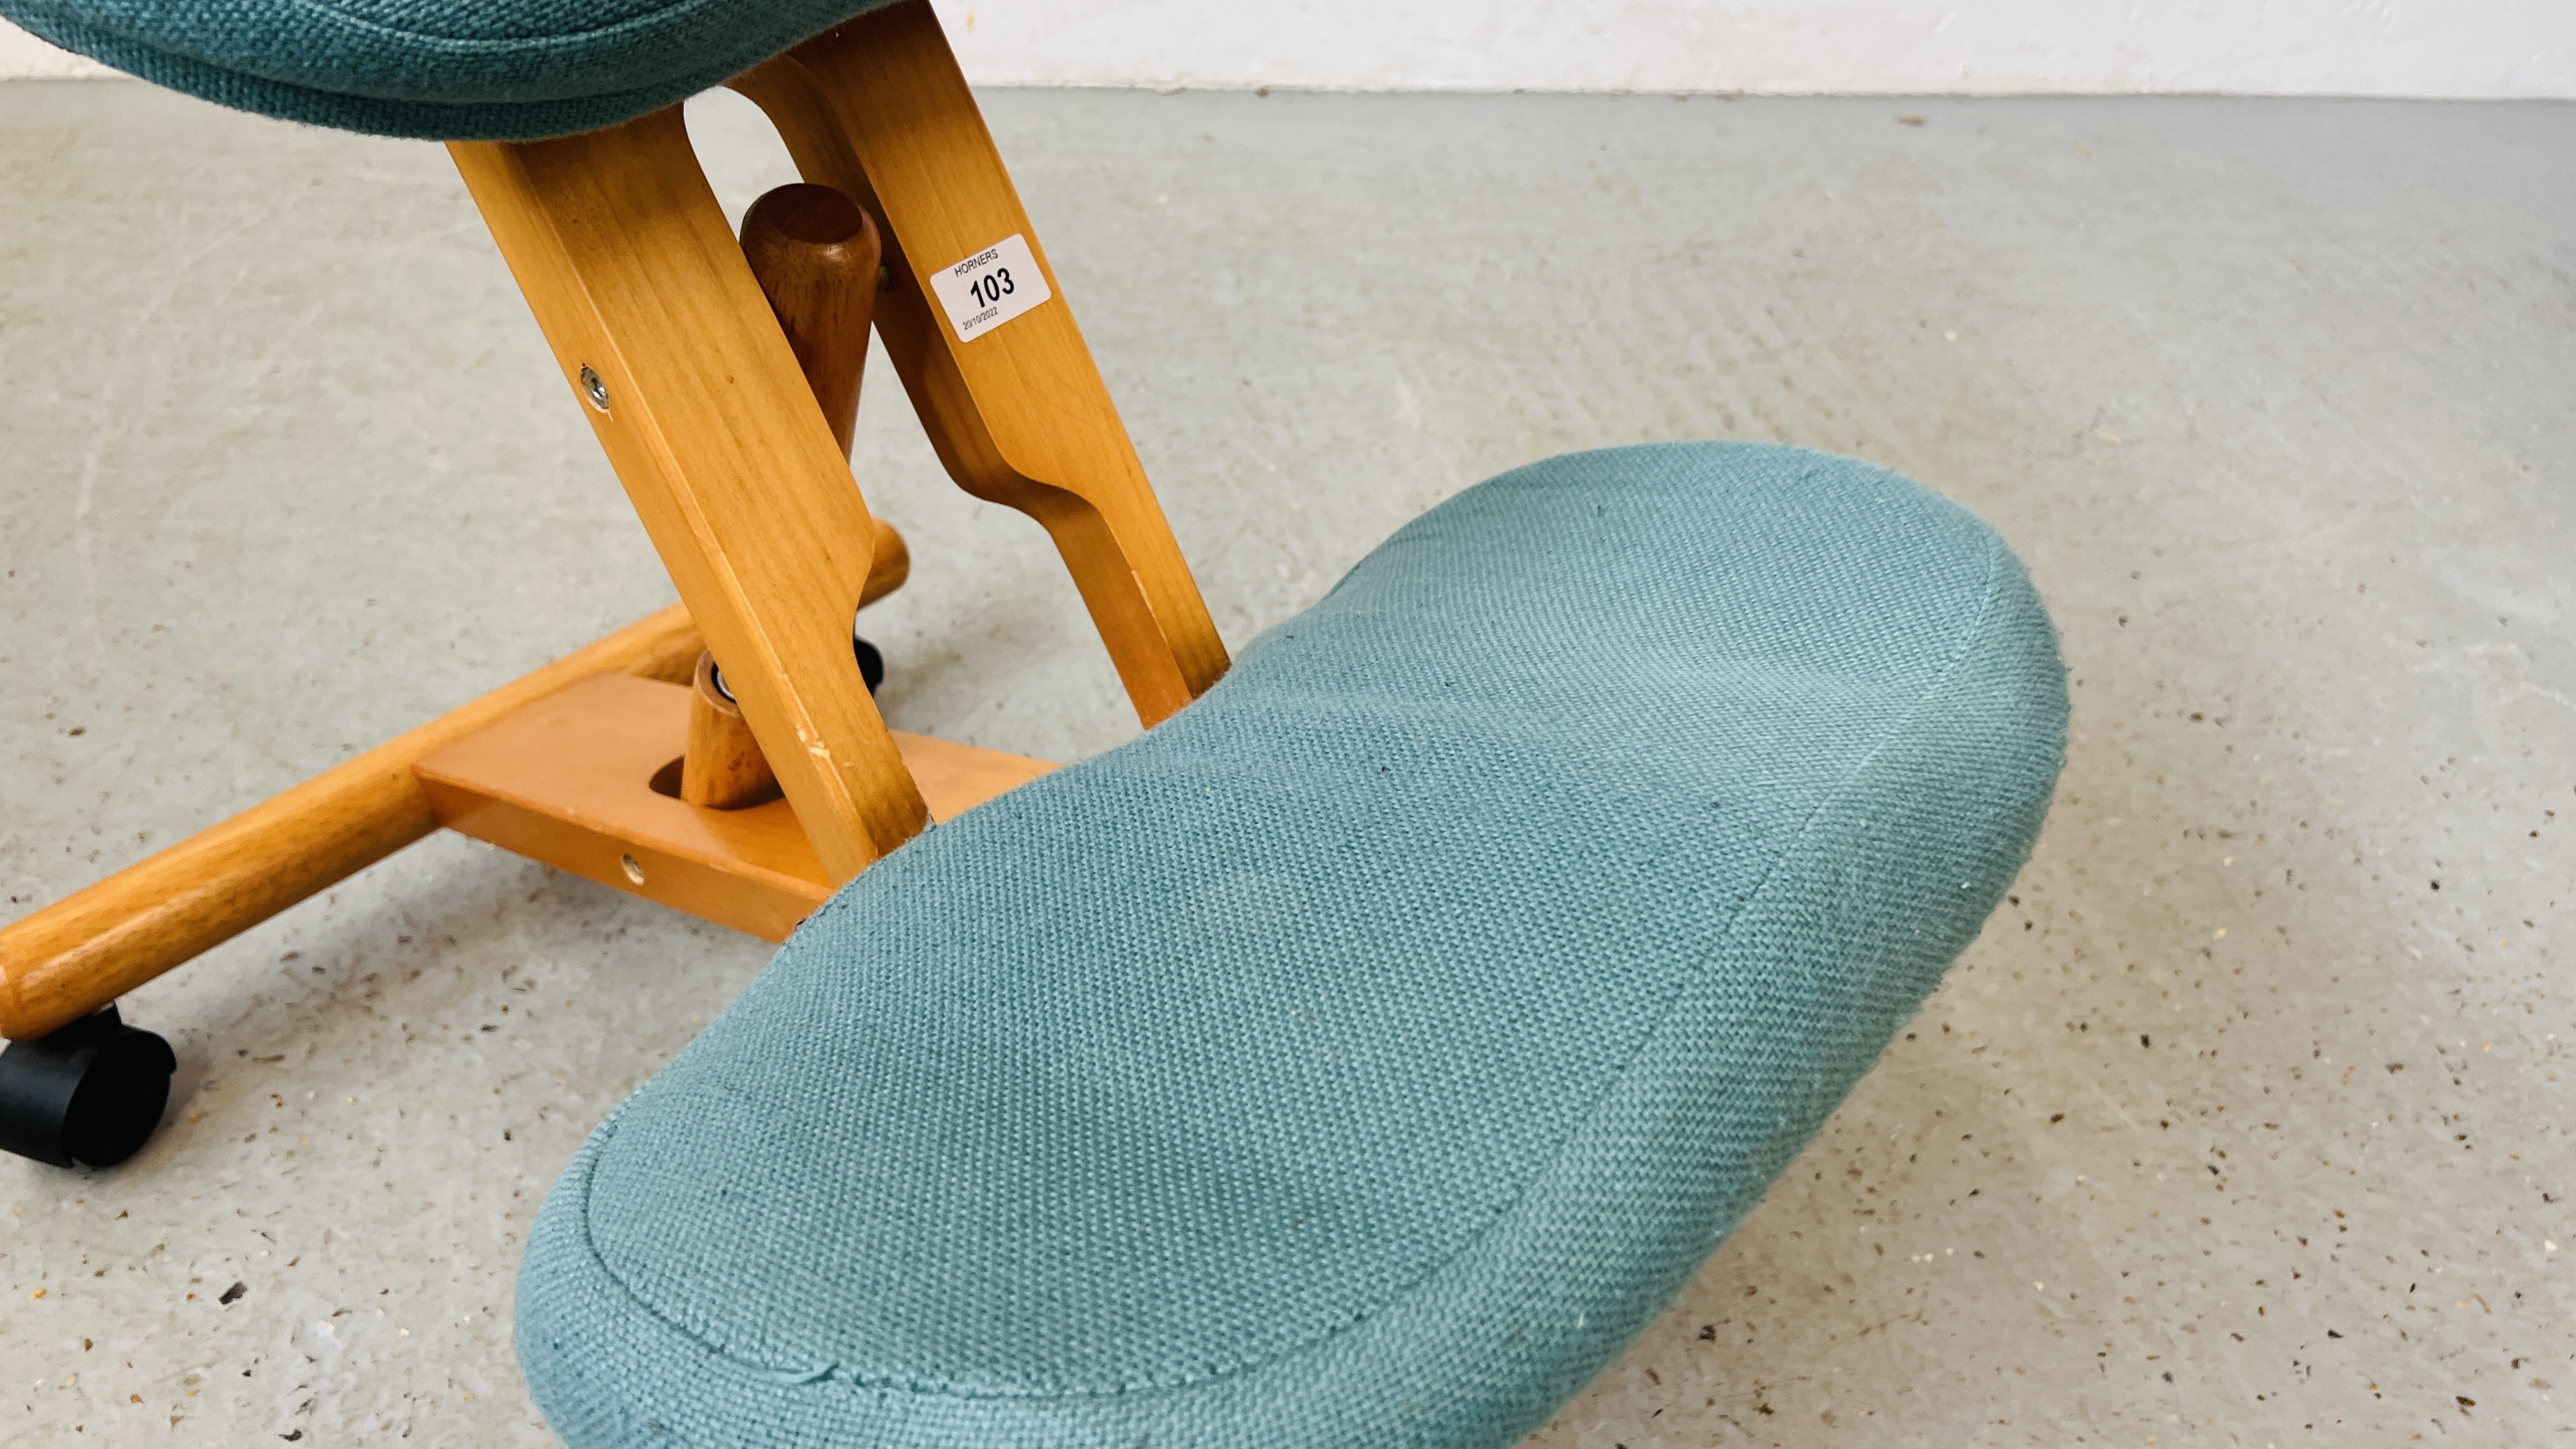 A BACK SUPPORT WHEELED KNEELING CHAIR. - Image 3 of 5